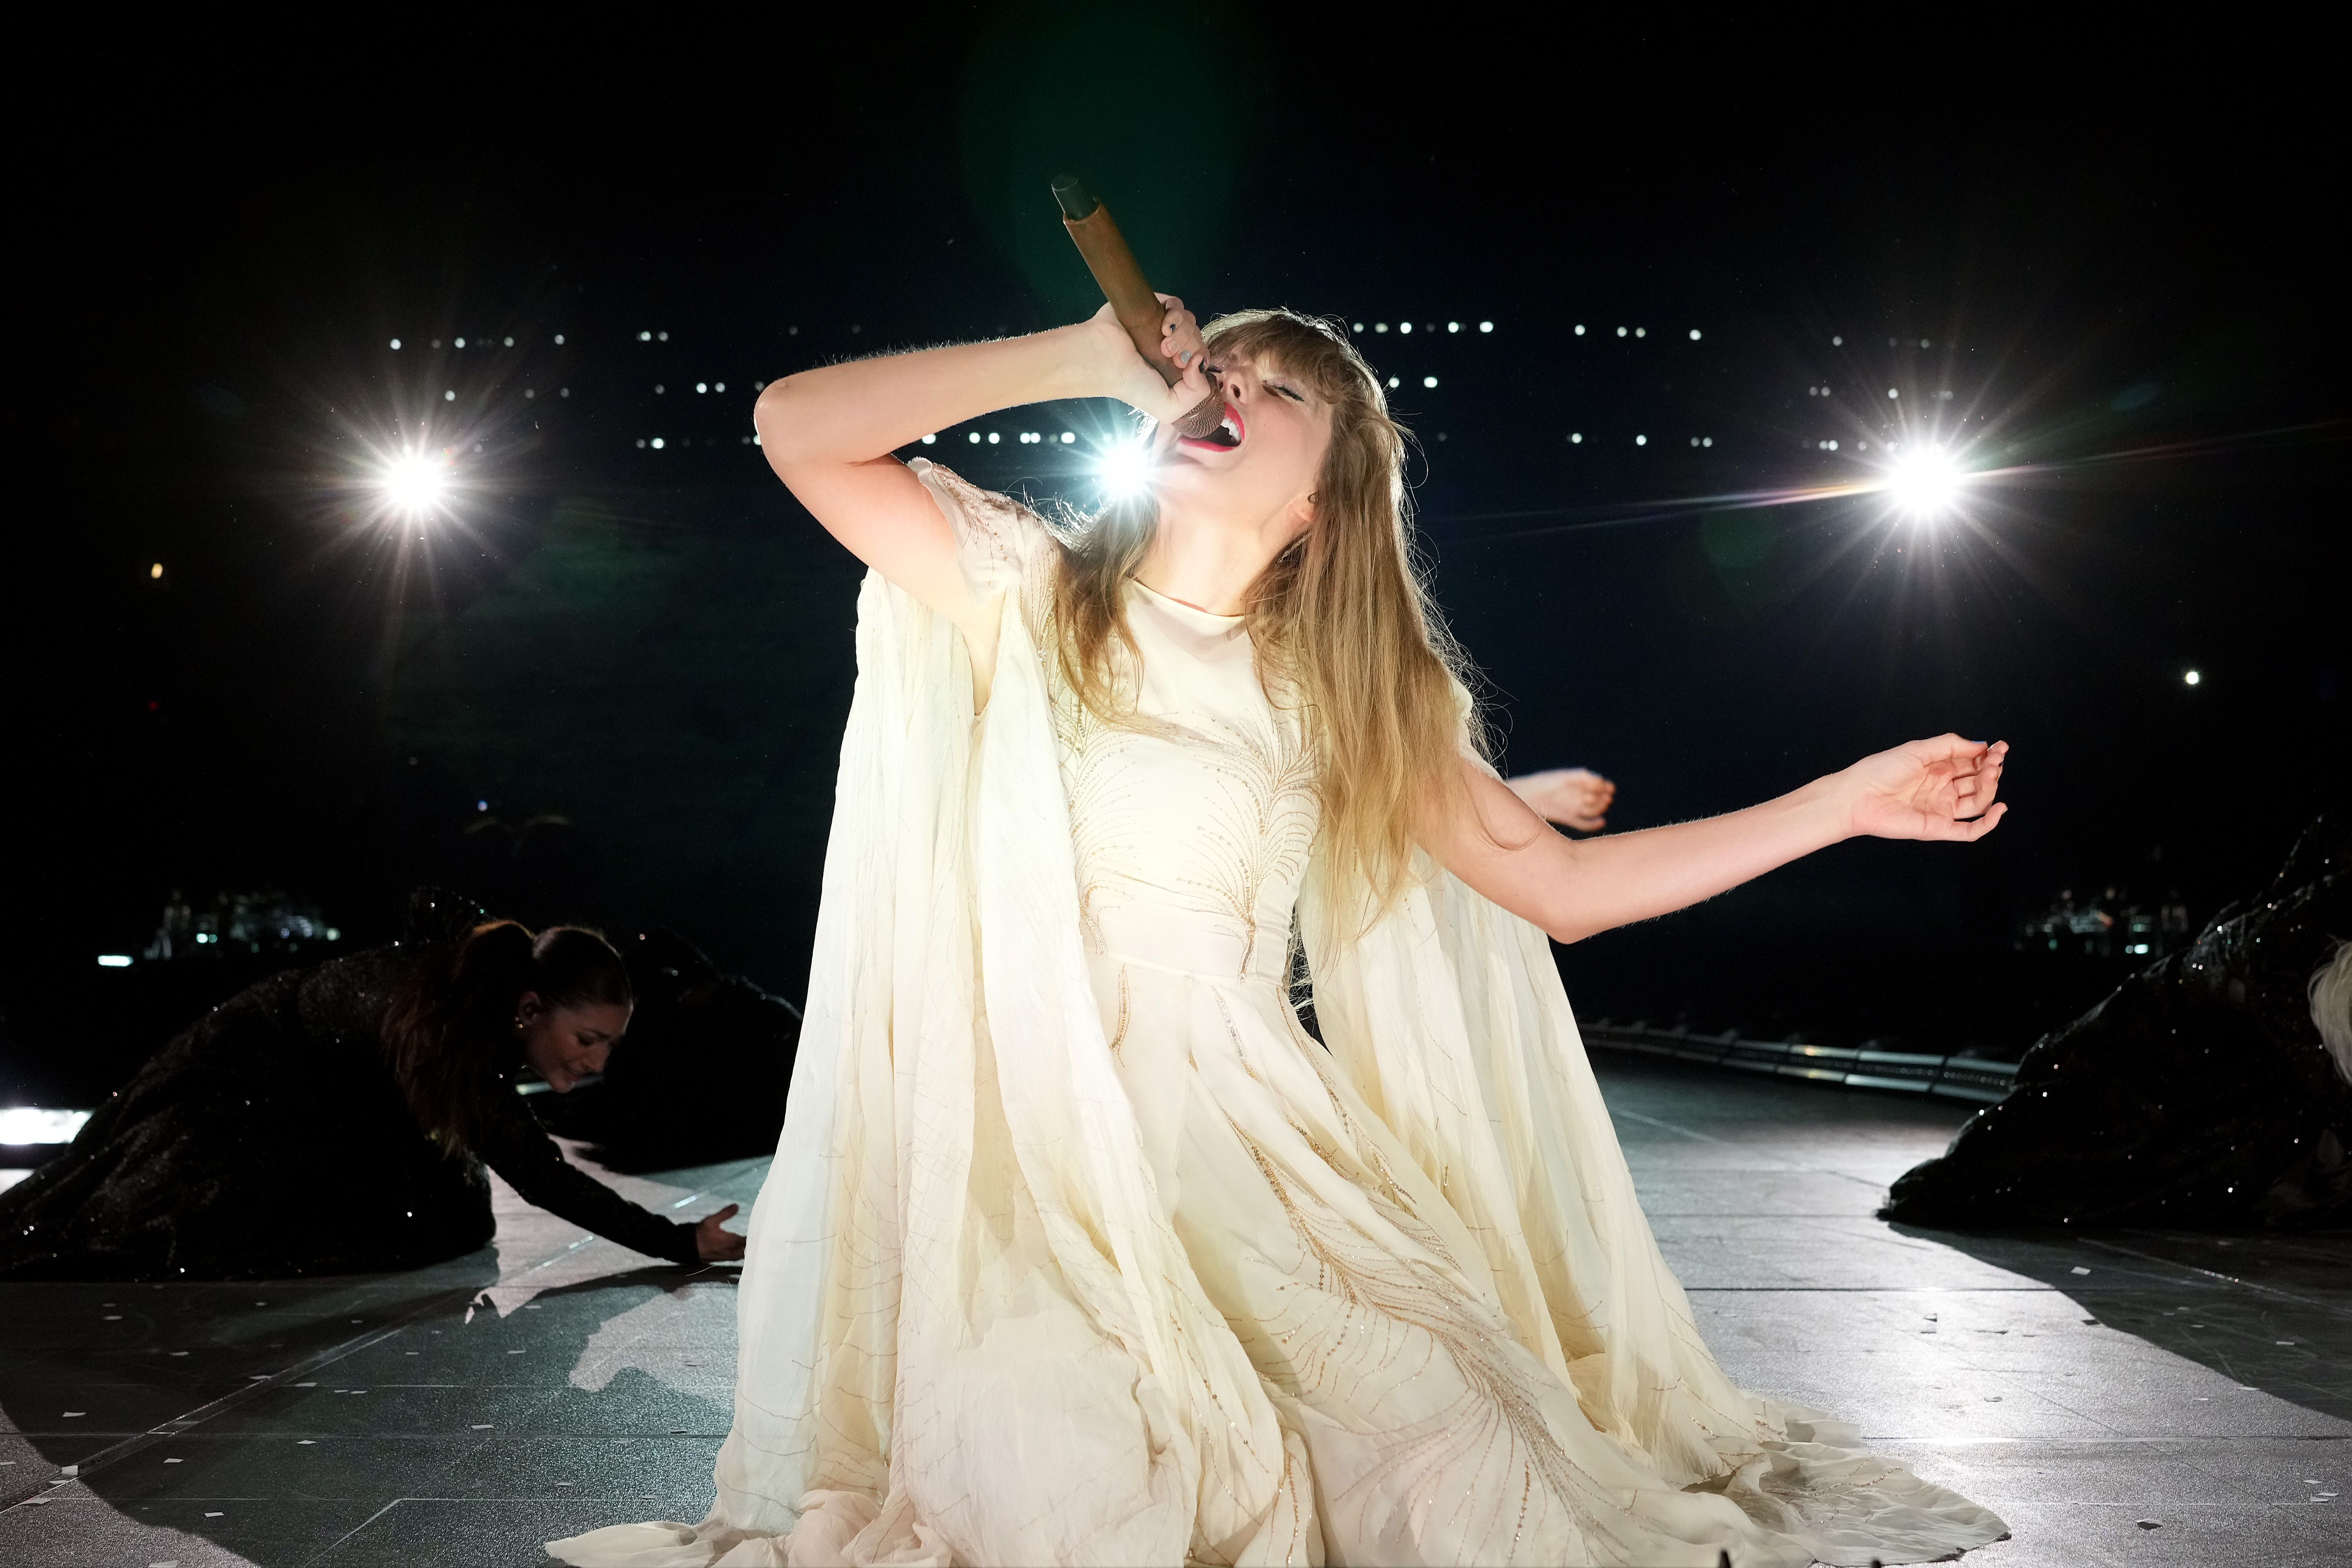 What to Wear: Taylor Swift's Eras Tour